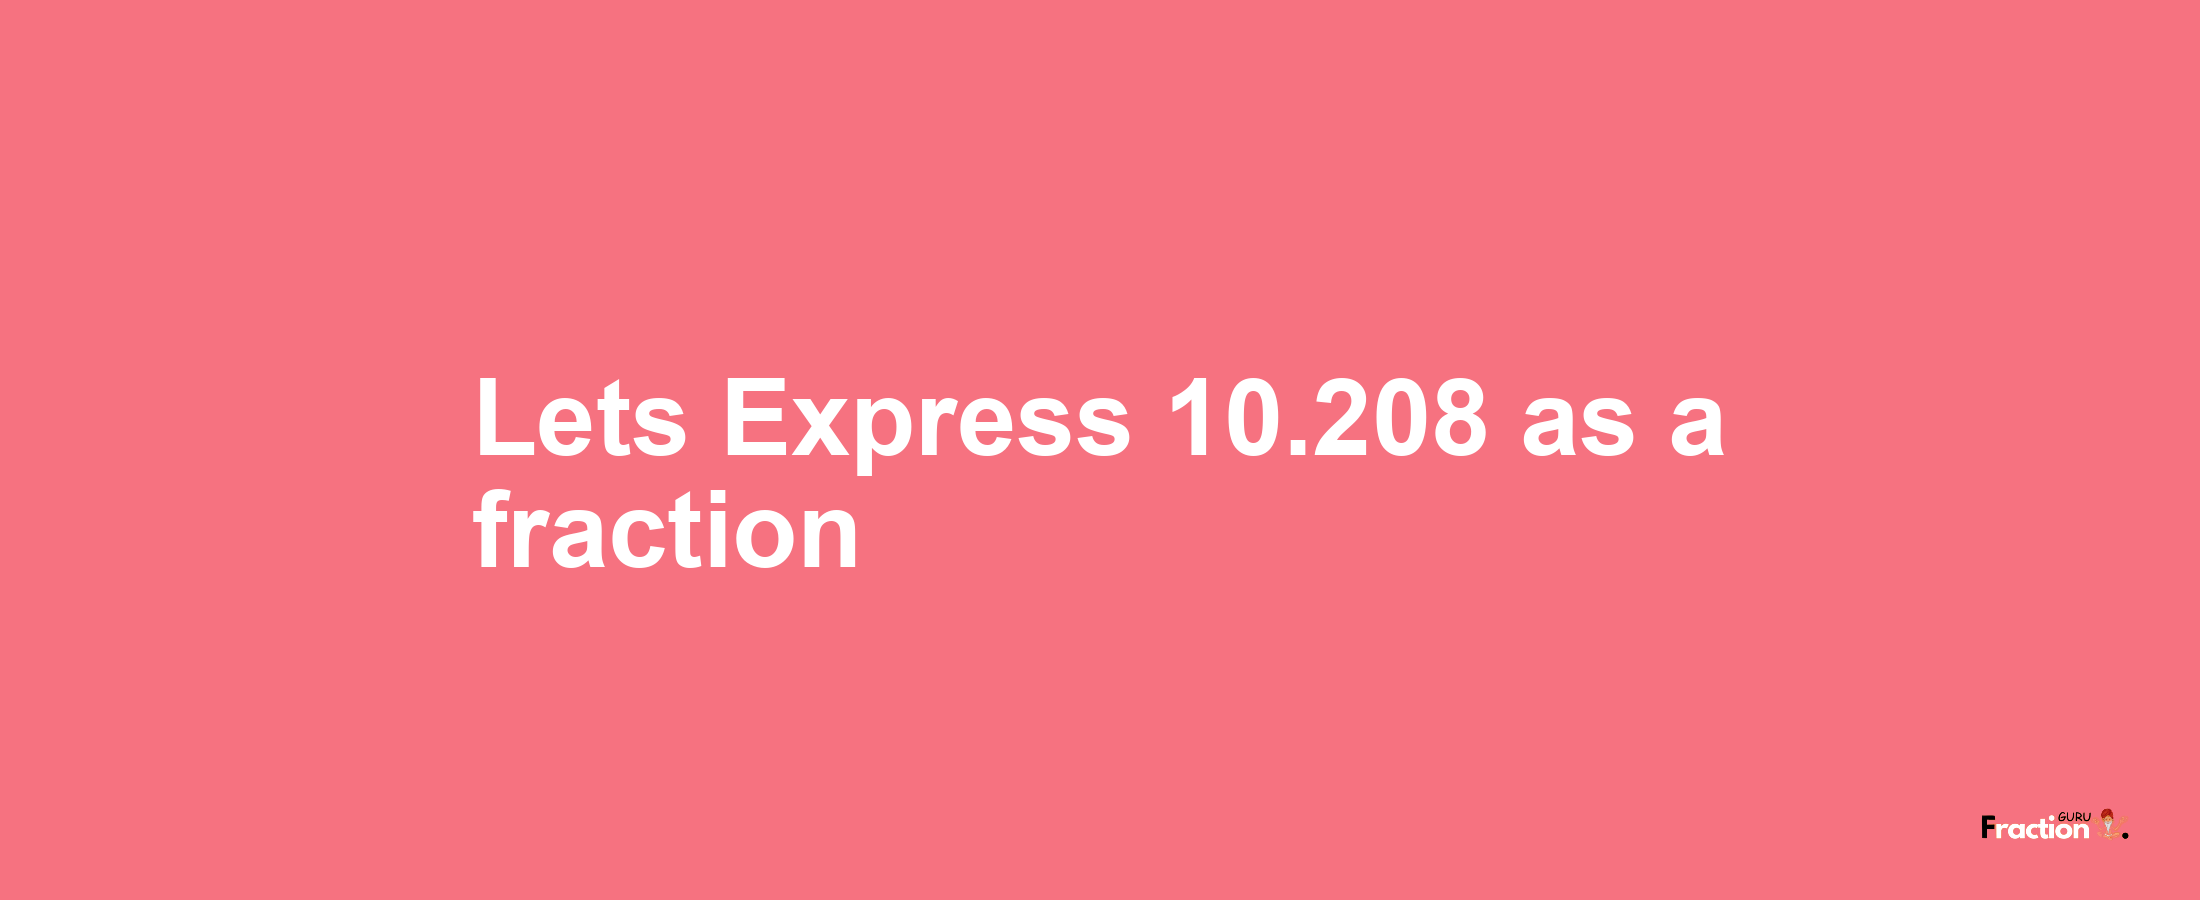 Lets Express 10.208 as afraction